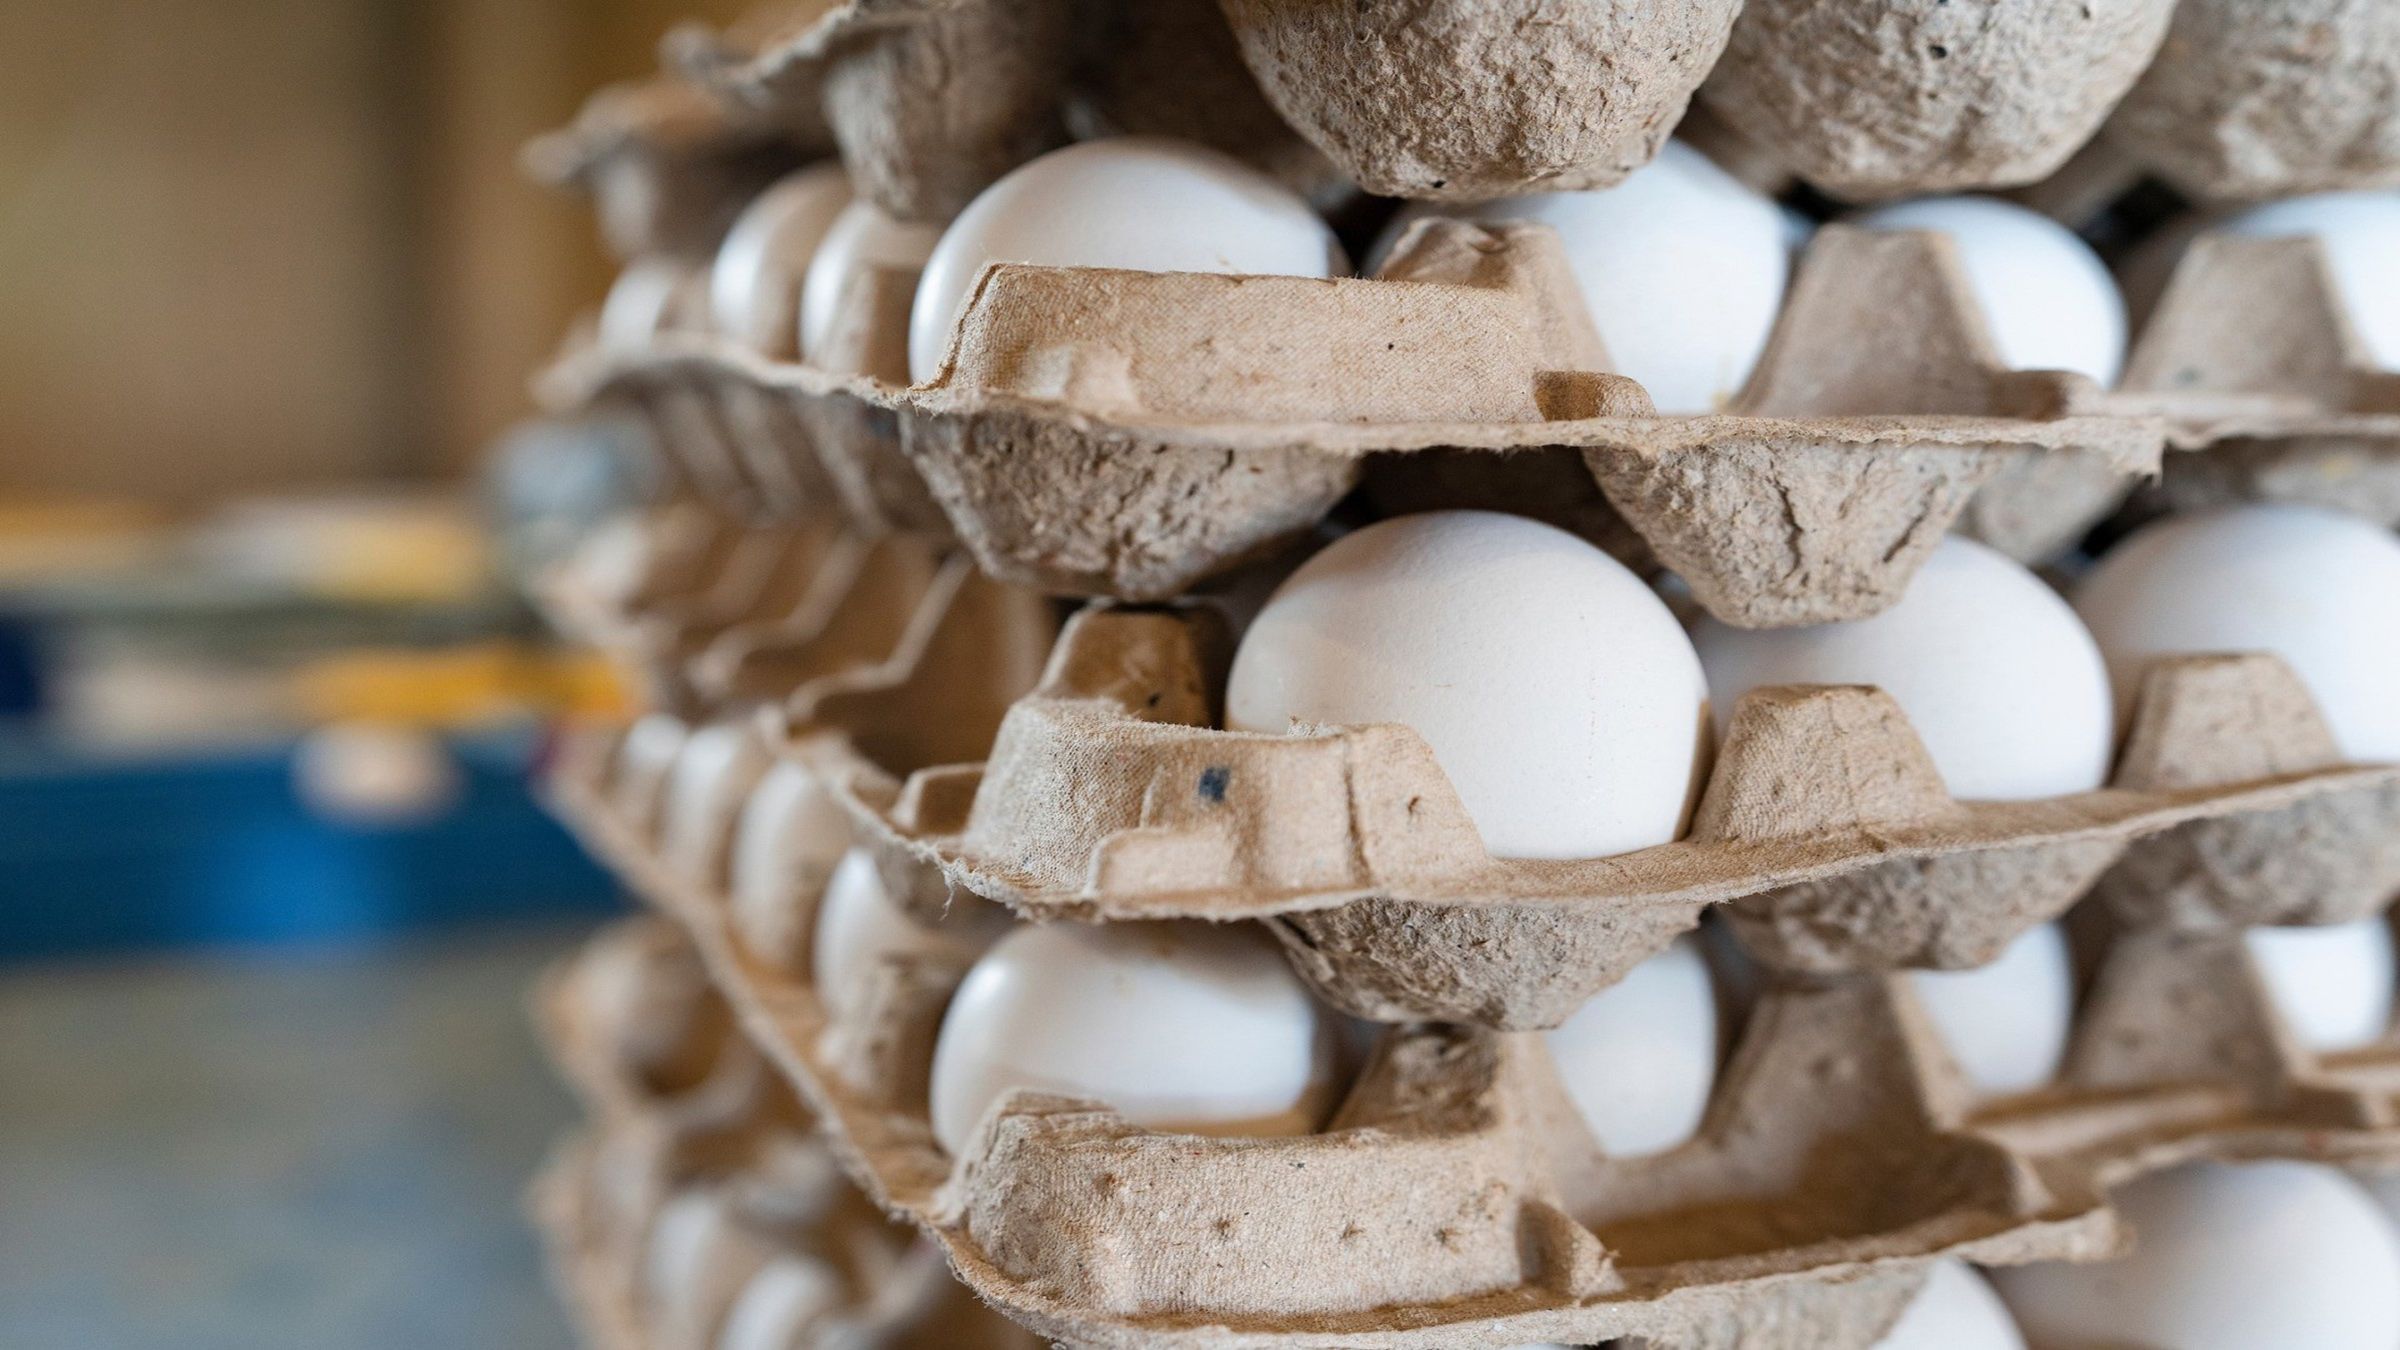 Another round of price hikes for eggs